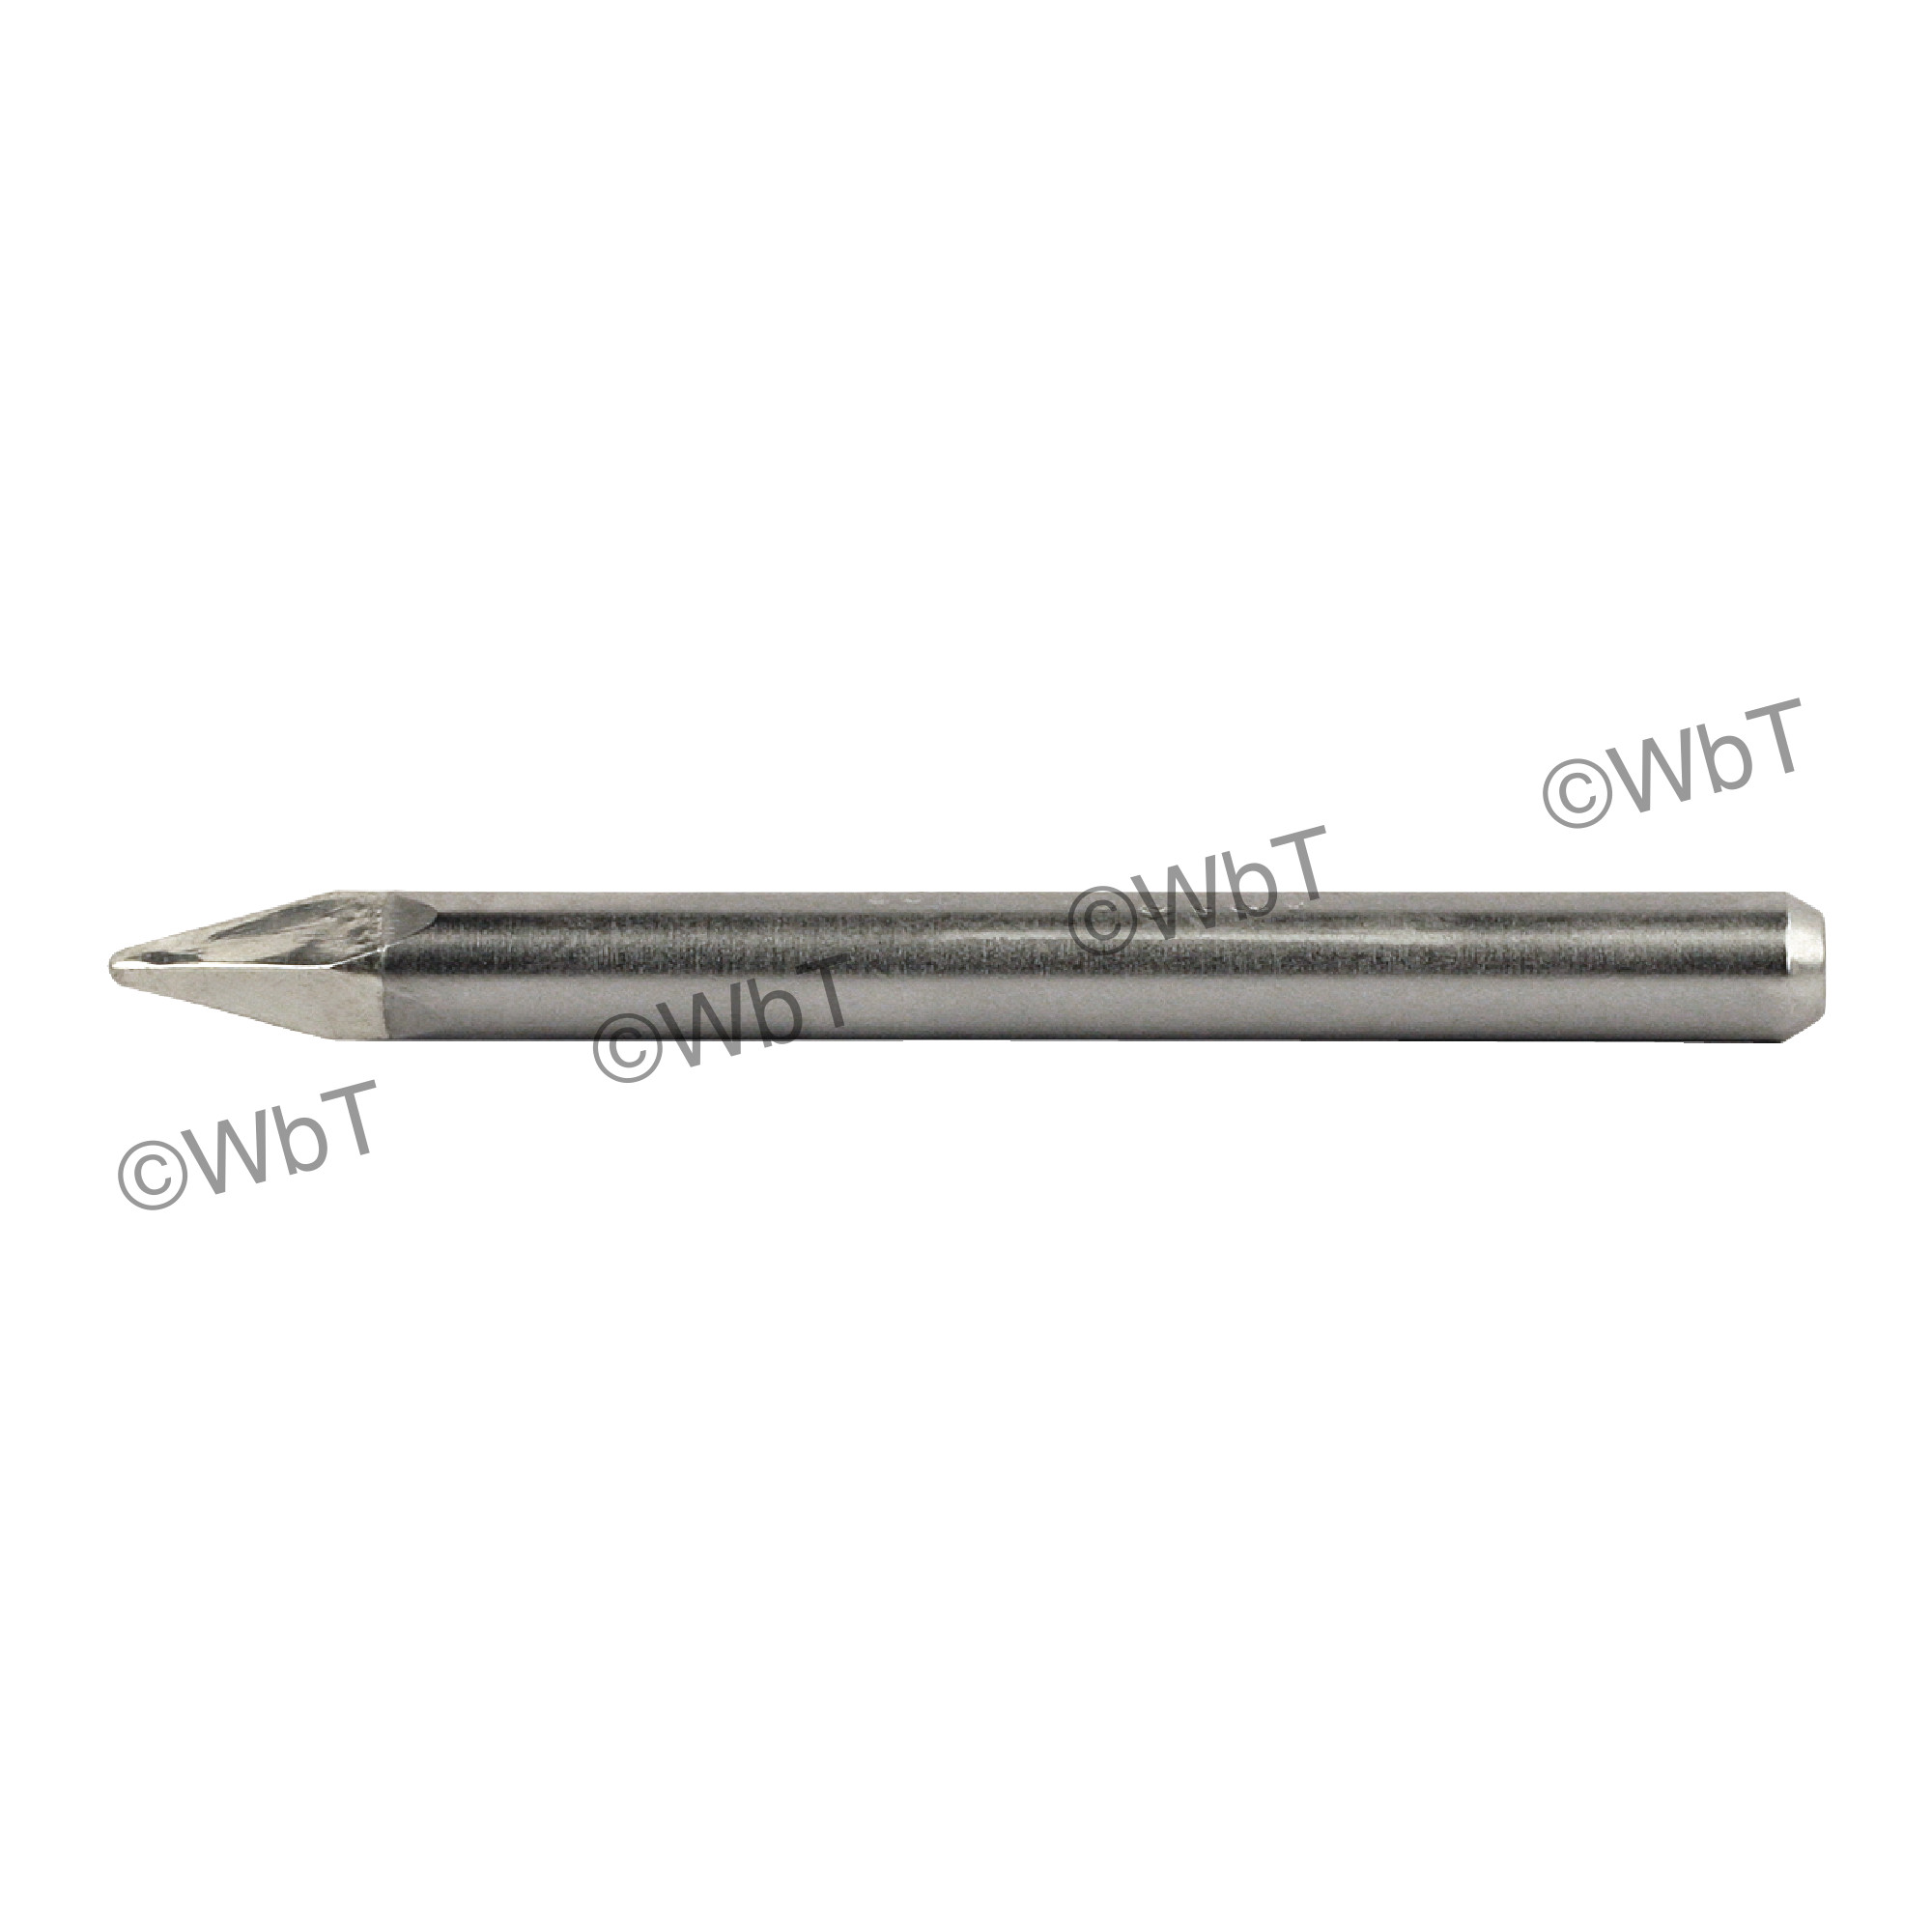 Long Diamond Style Replacement Soldering Iron Tip For Model #3114 & #3125